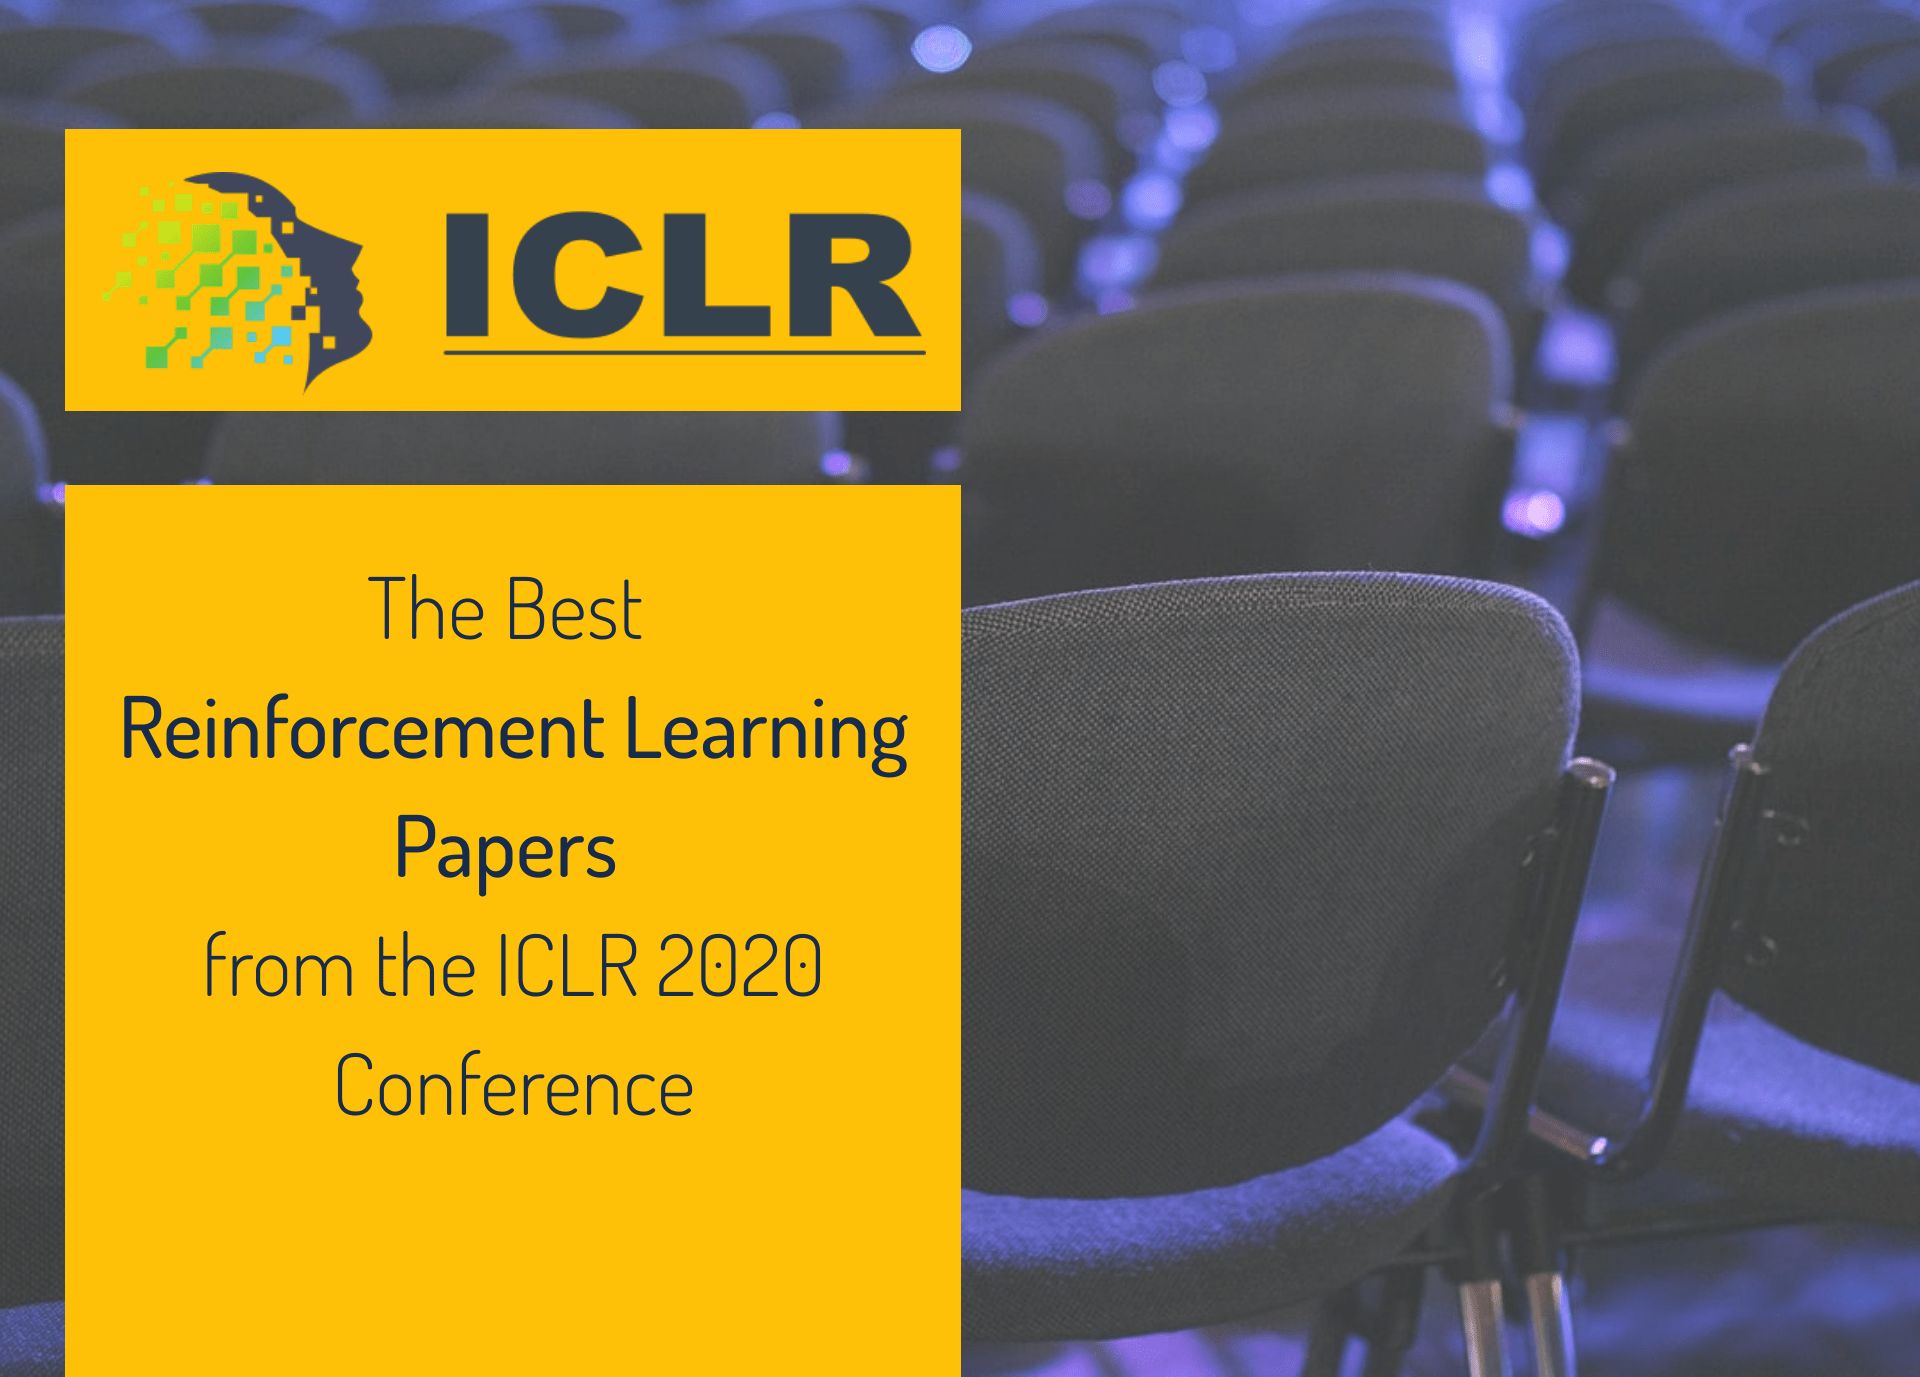 /the-iclr-2020-conference-reinforcement-learning-papers-demystified-41l3taa feature image